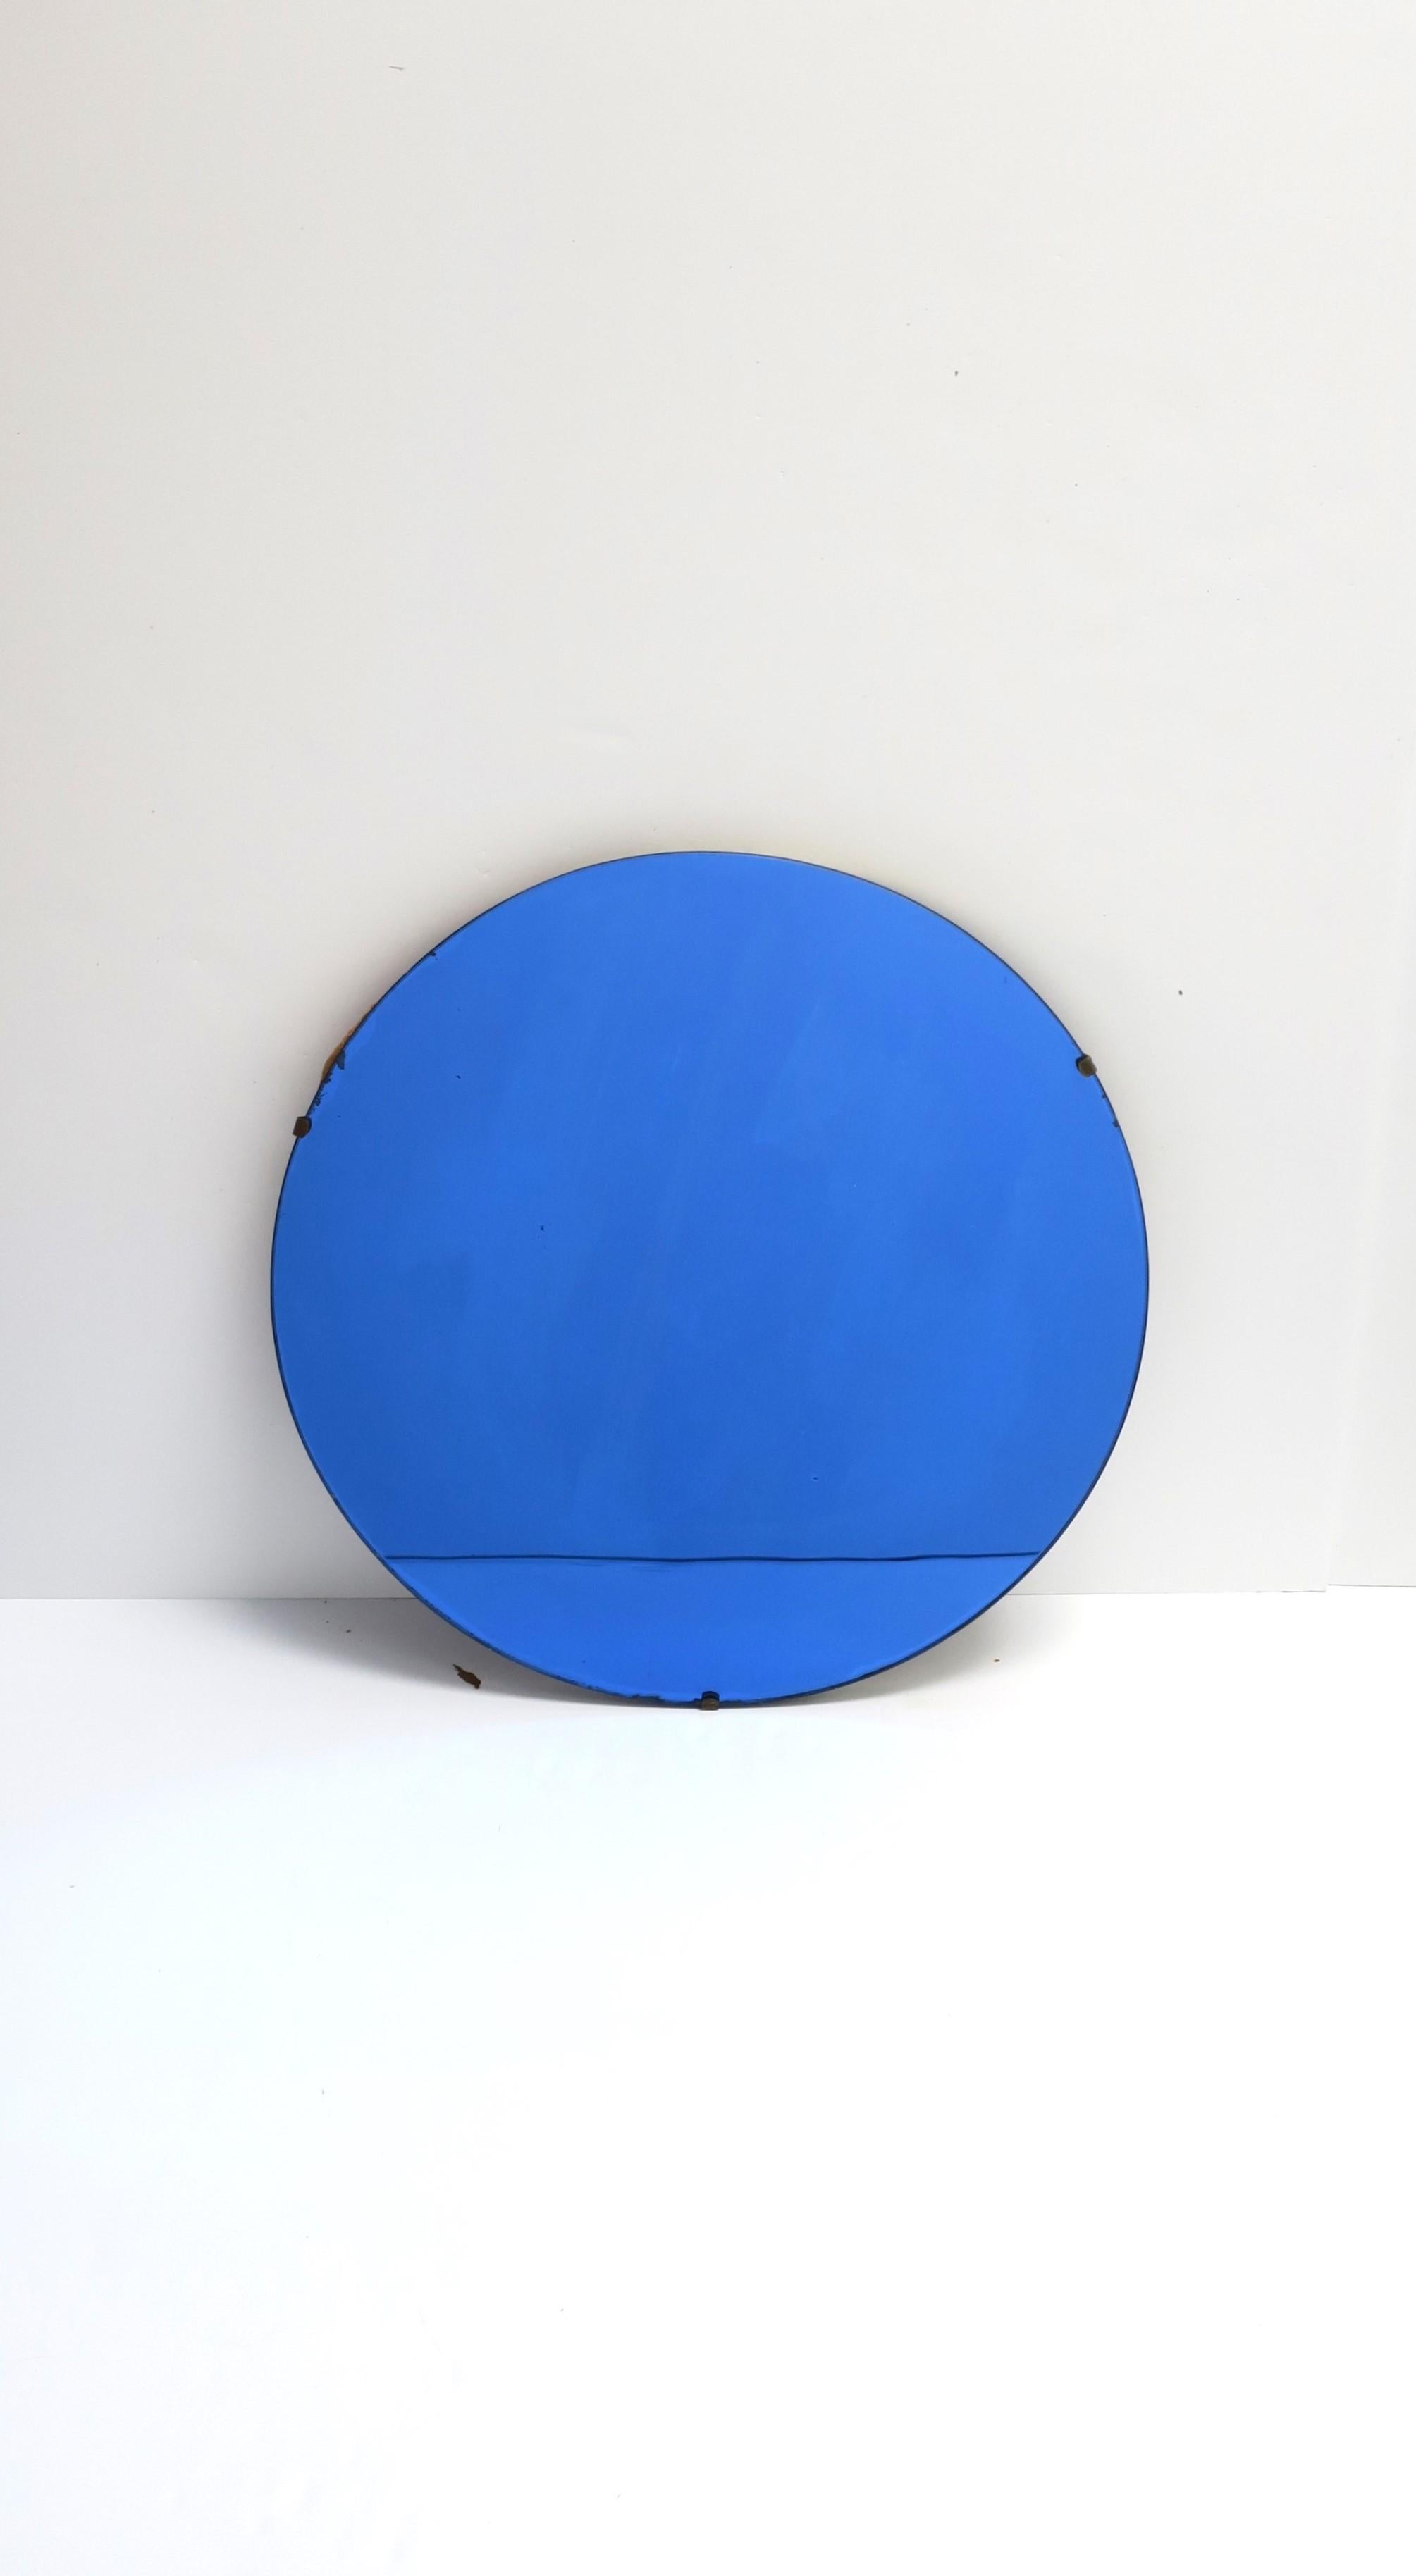 A beautiful cobalt blue round glass wall mirror, Art Deco period, circa early-20th century, Europe. Piece is prepared for hanging as shown in last image. Very good condition as shown in images. No chips noted. Dimensions: .88